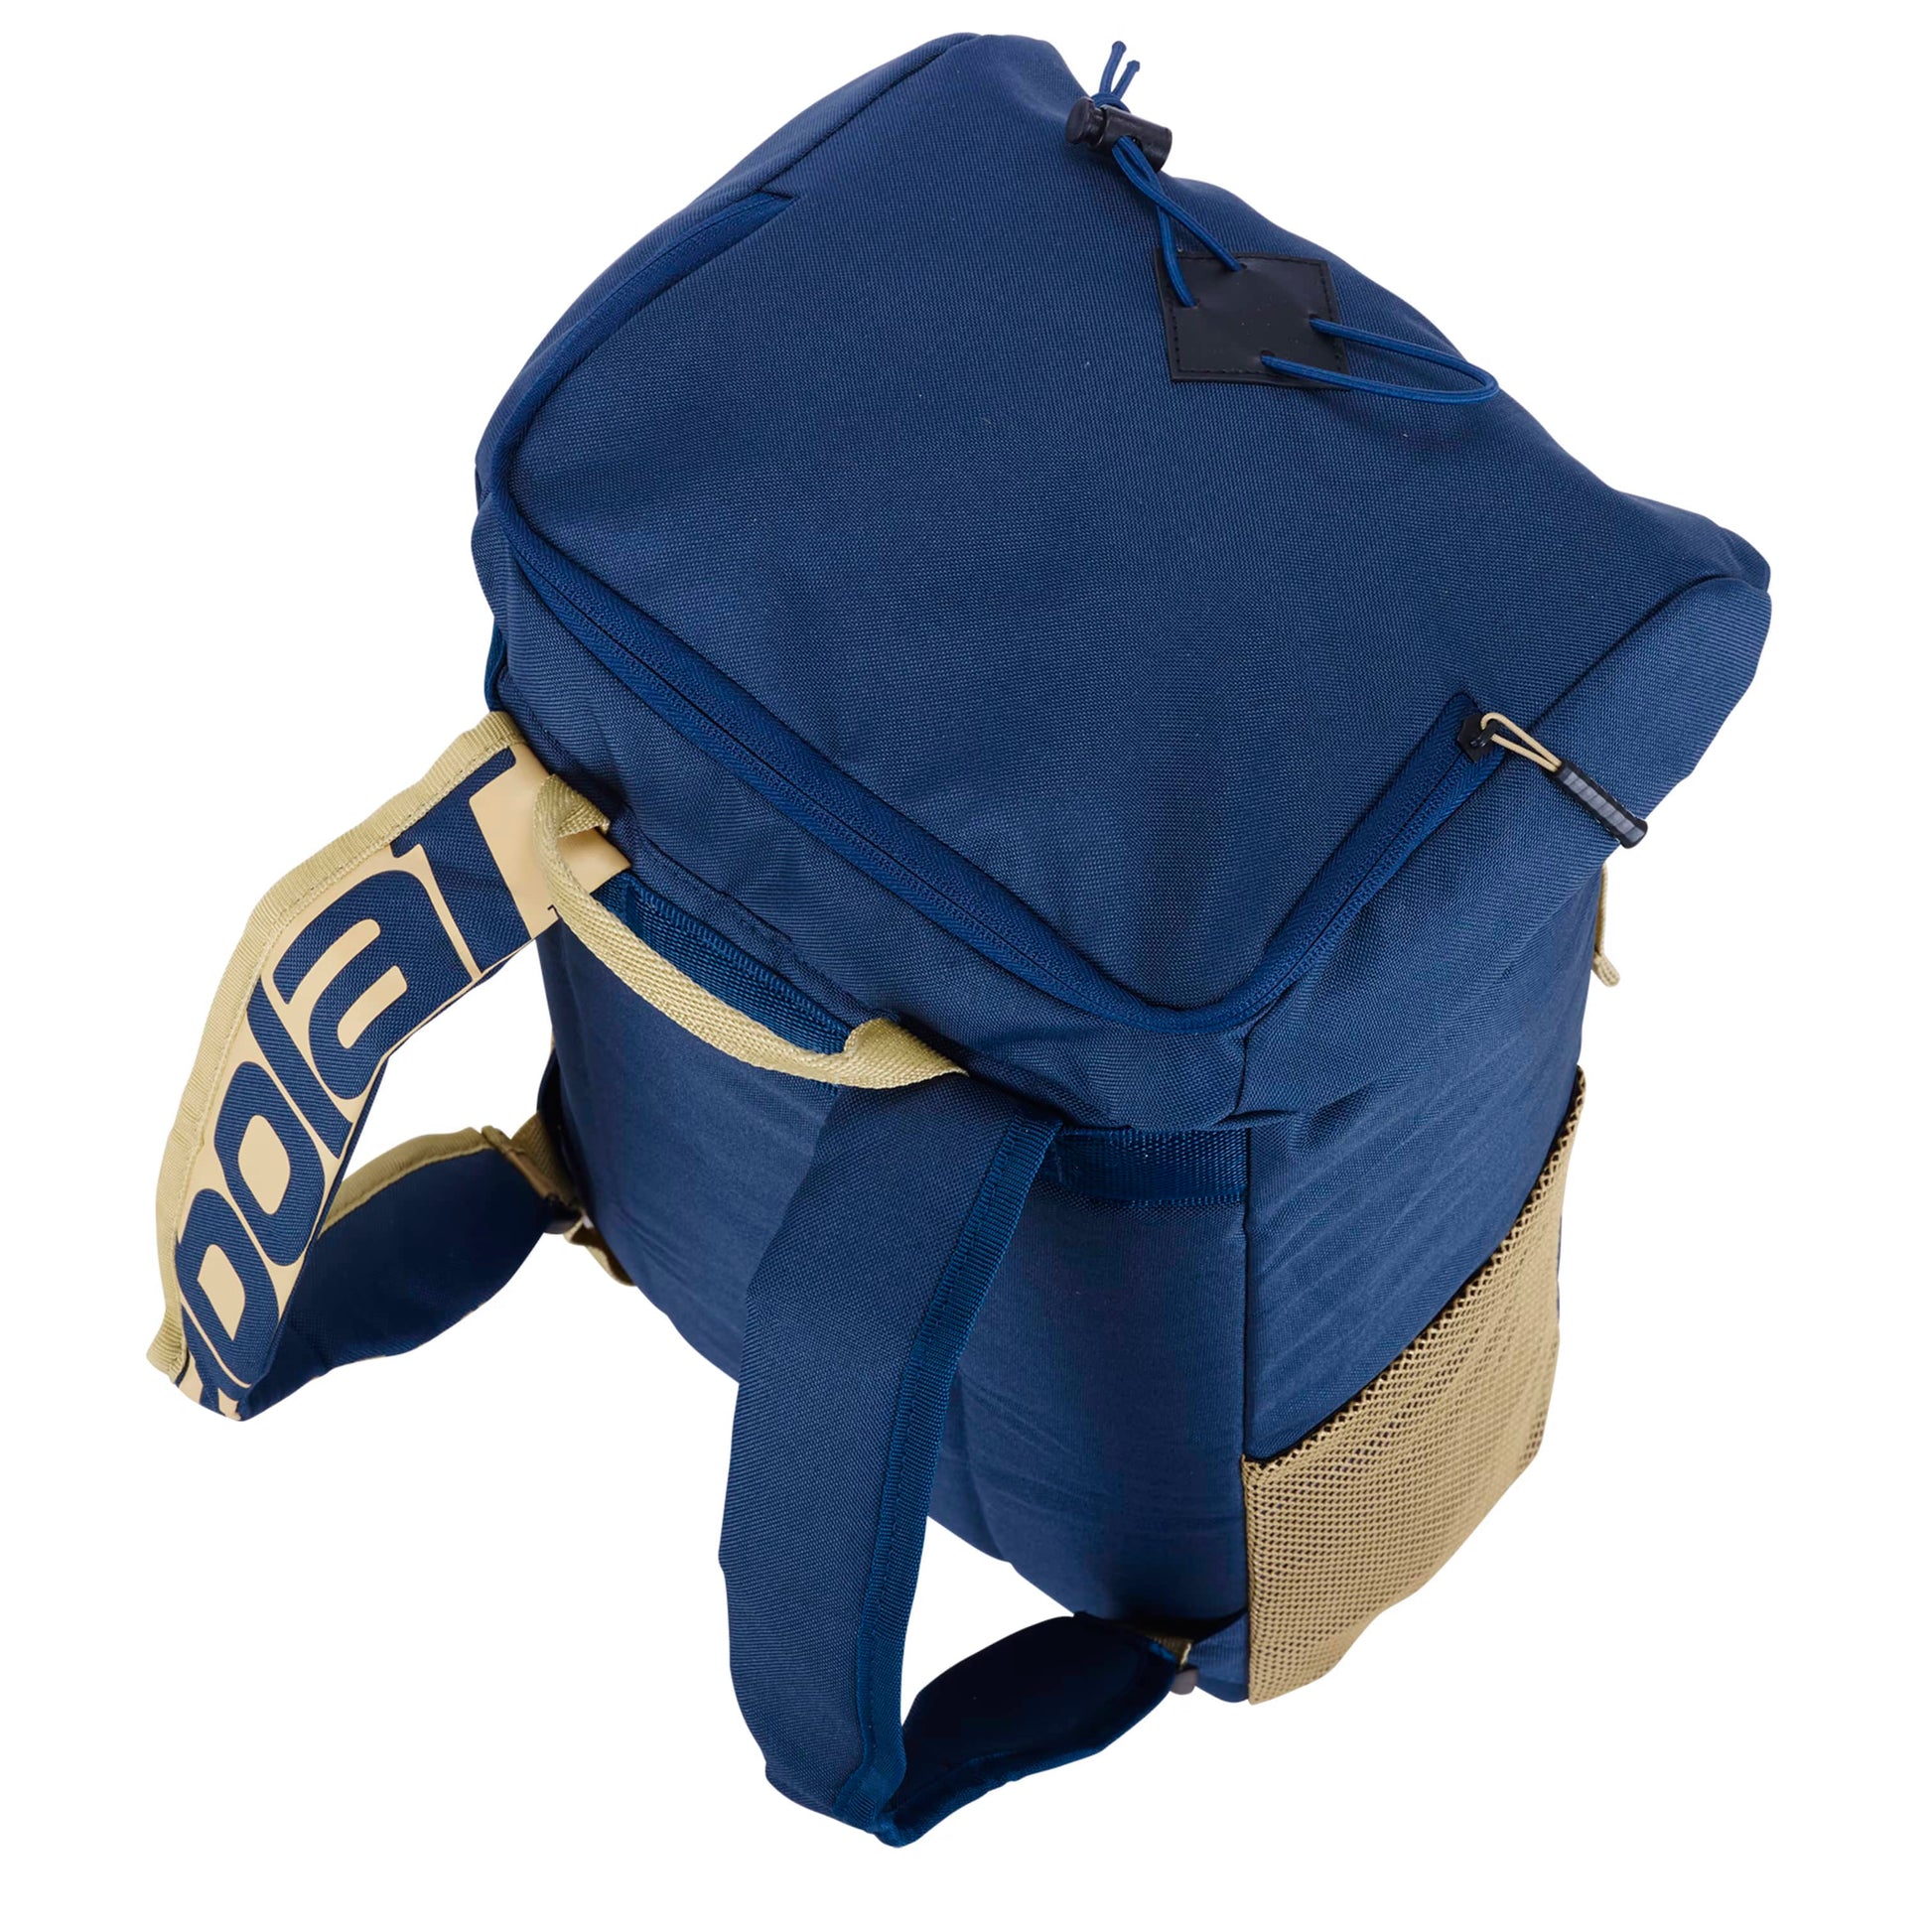 Babolat Classic Backpack Navy Blue - Top